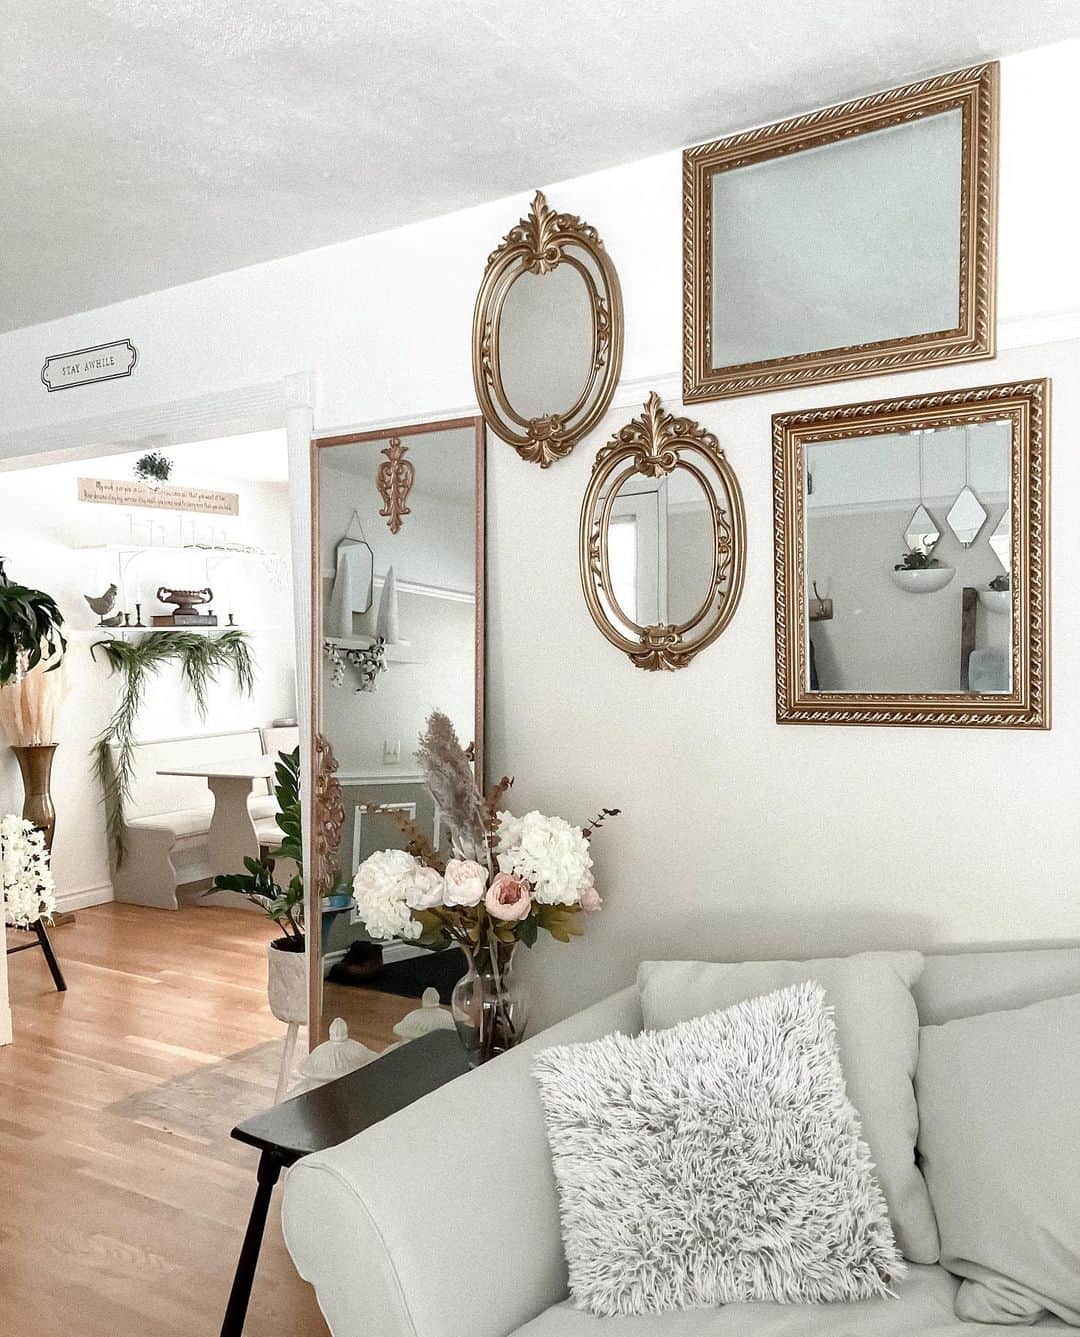 Achieve Elegance with a Gallery Wall of Mirrors